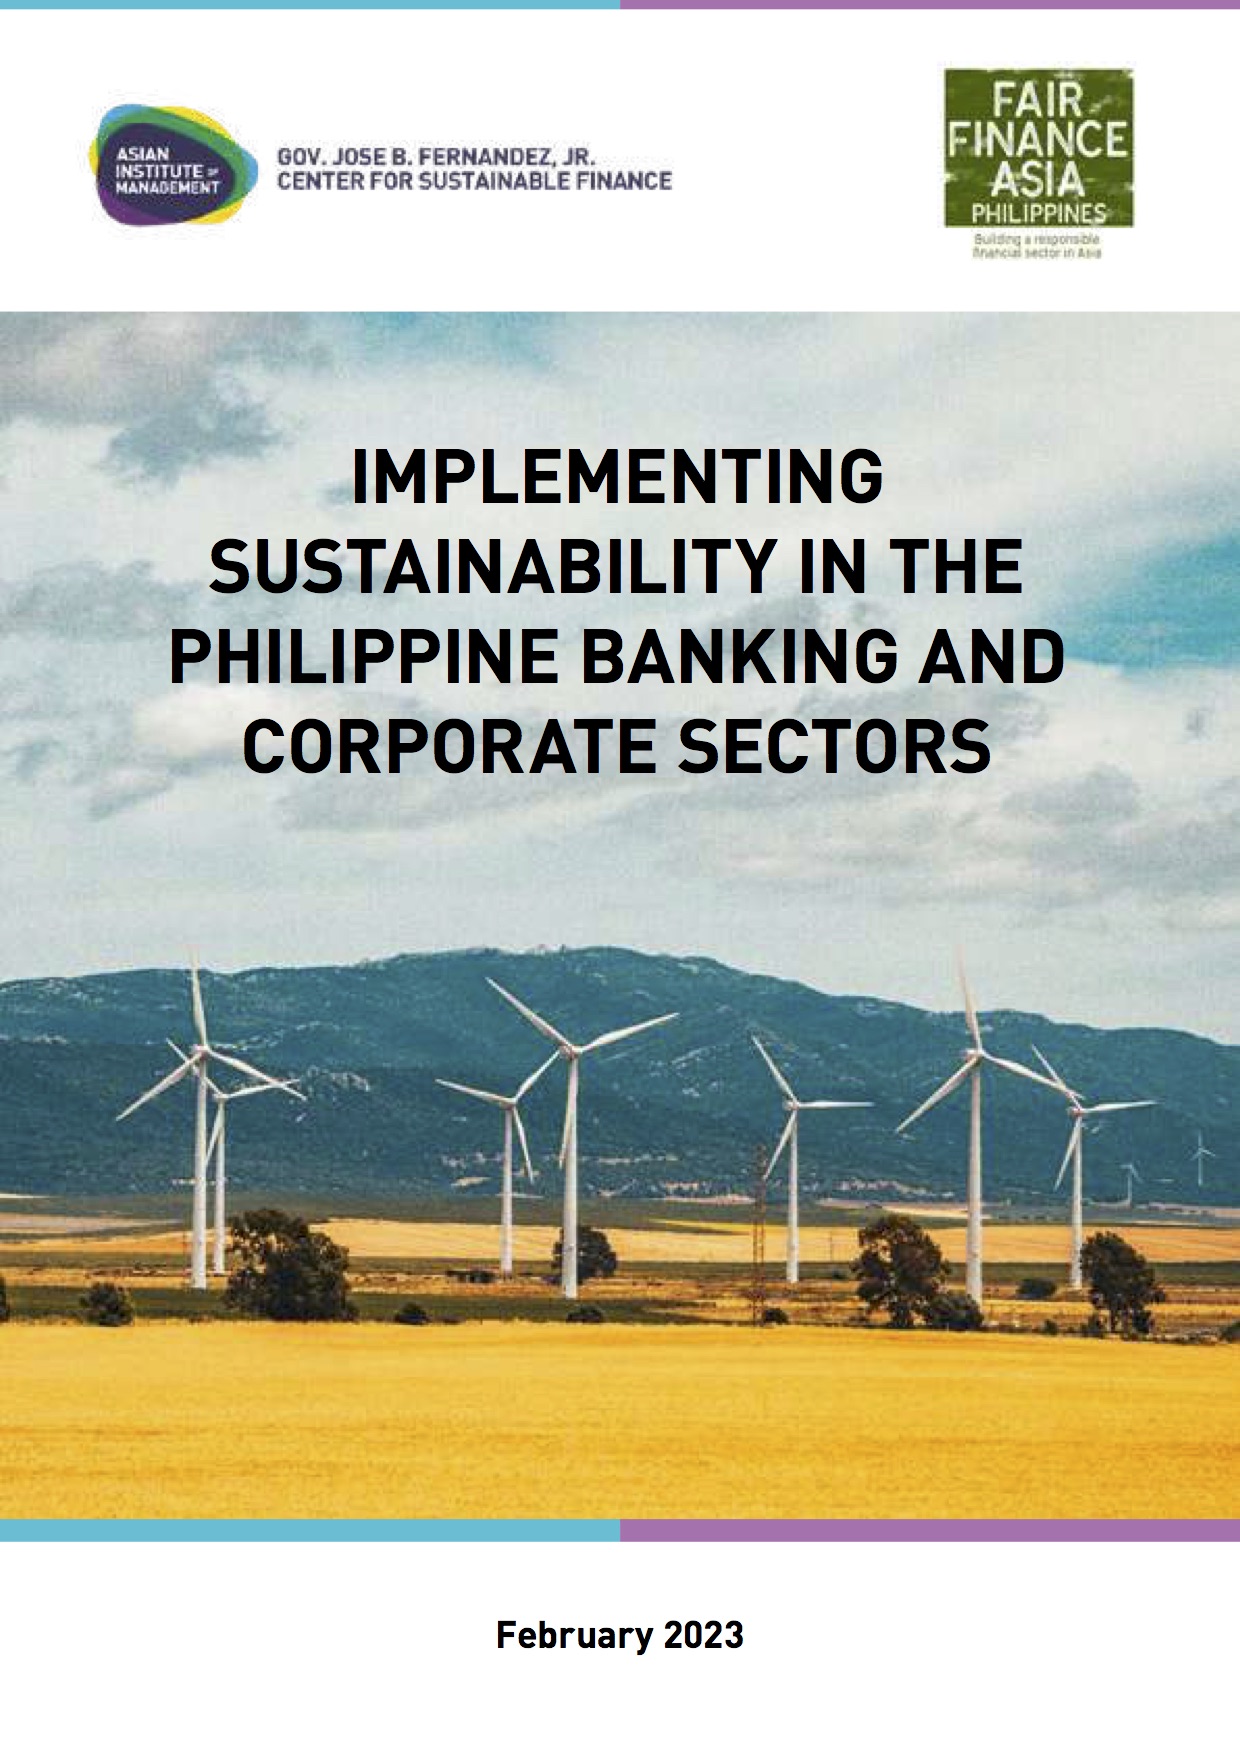 AIM and FF Philippines Launch Study on Implementing Sustainability in the Philippine Banking and Corporate Sectors